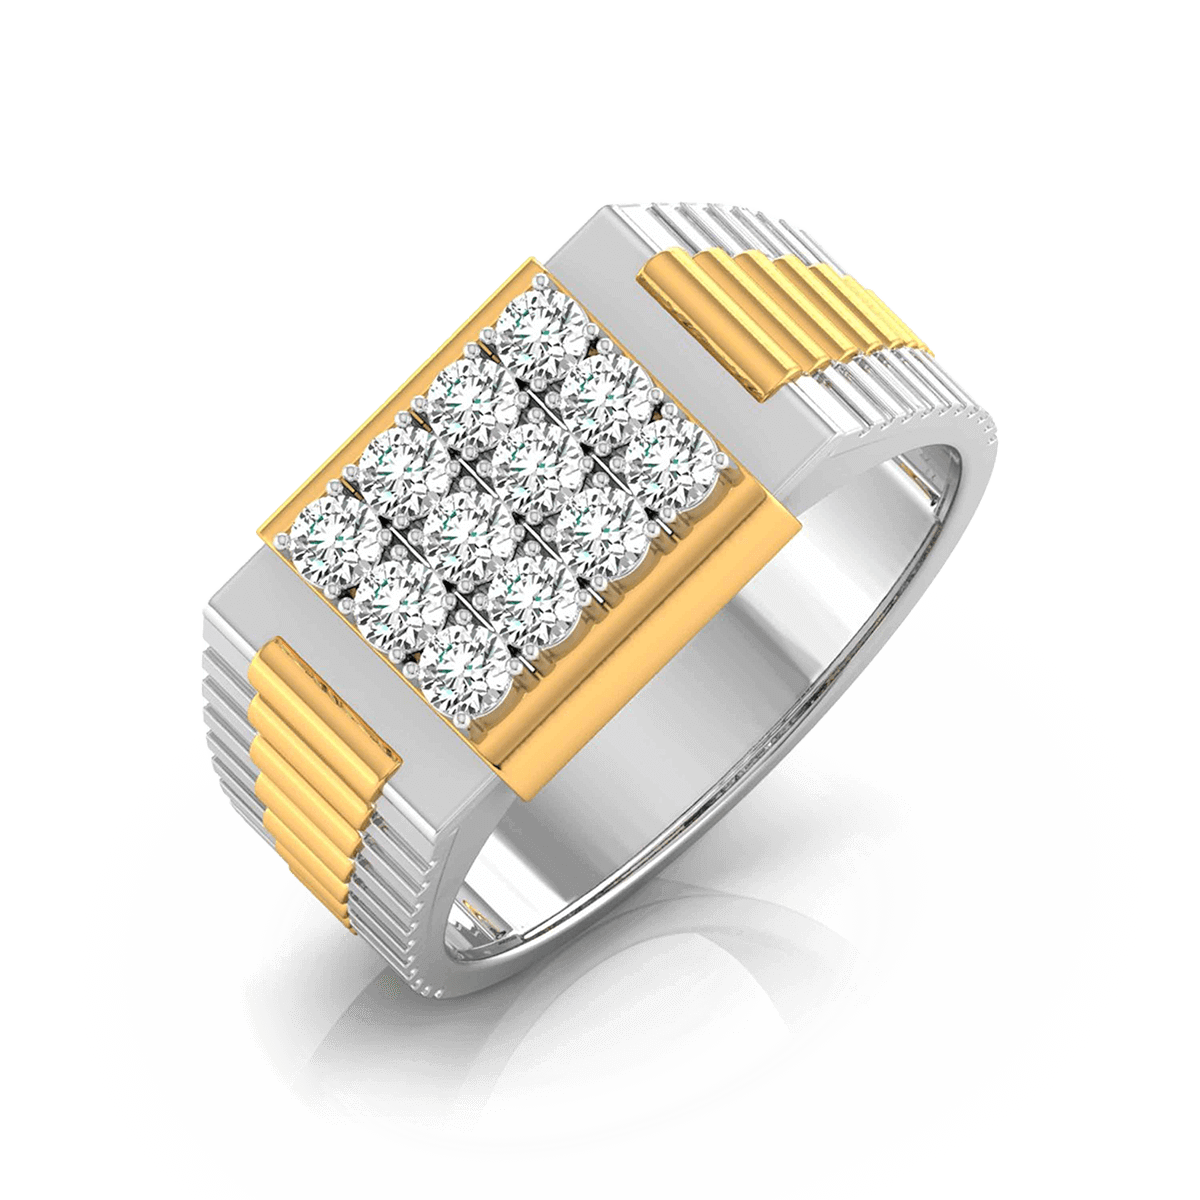 Keyzar · Unique Wedding Bands For Men Classic to Contemporary - Unique  Wedding Bands For Men Step Up Your Style - Guys Wedding Bands That Are Way  Unique